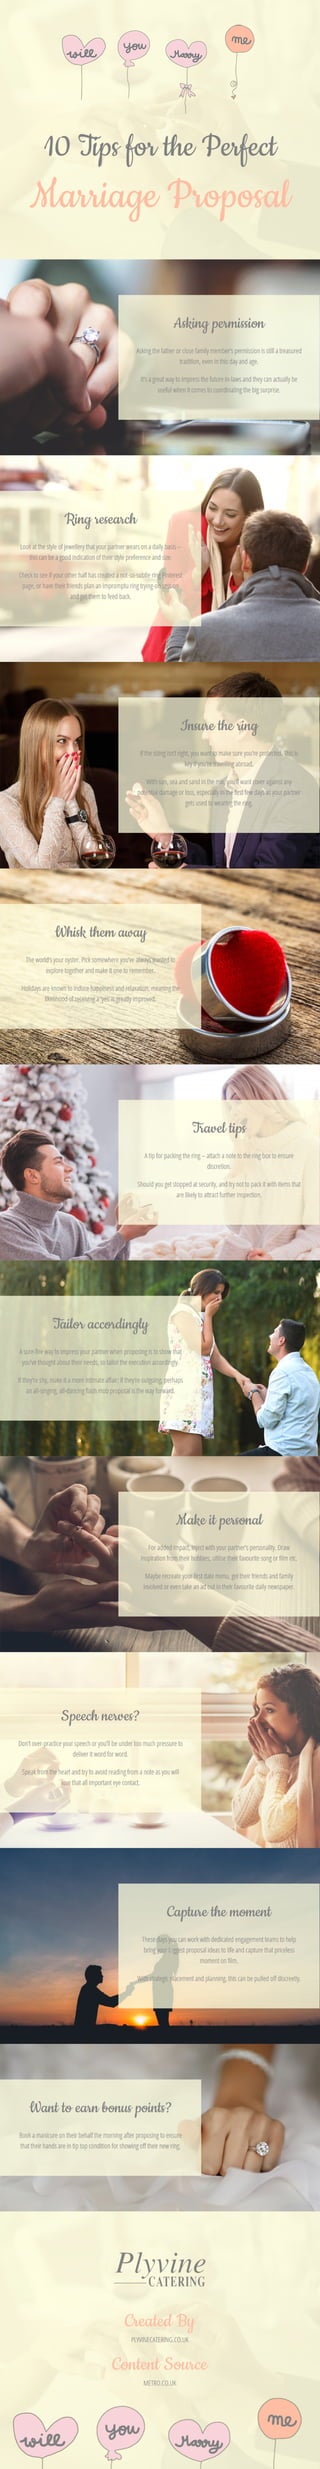 10 tips for the perfect marriage proposal